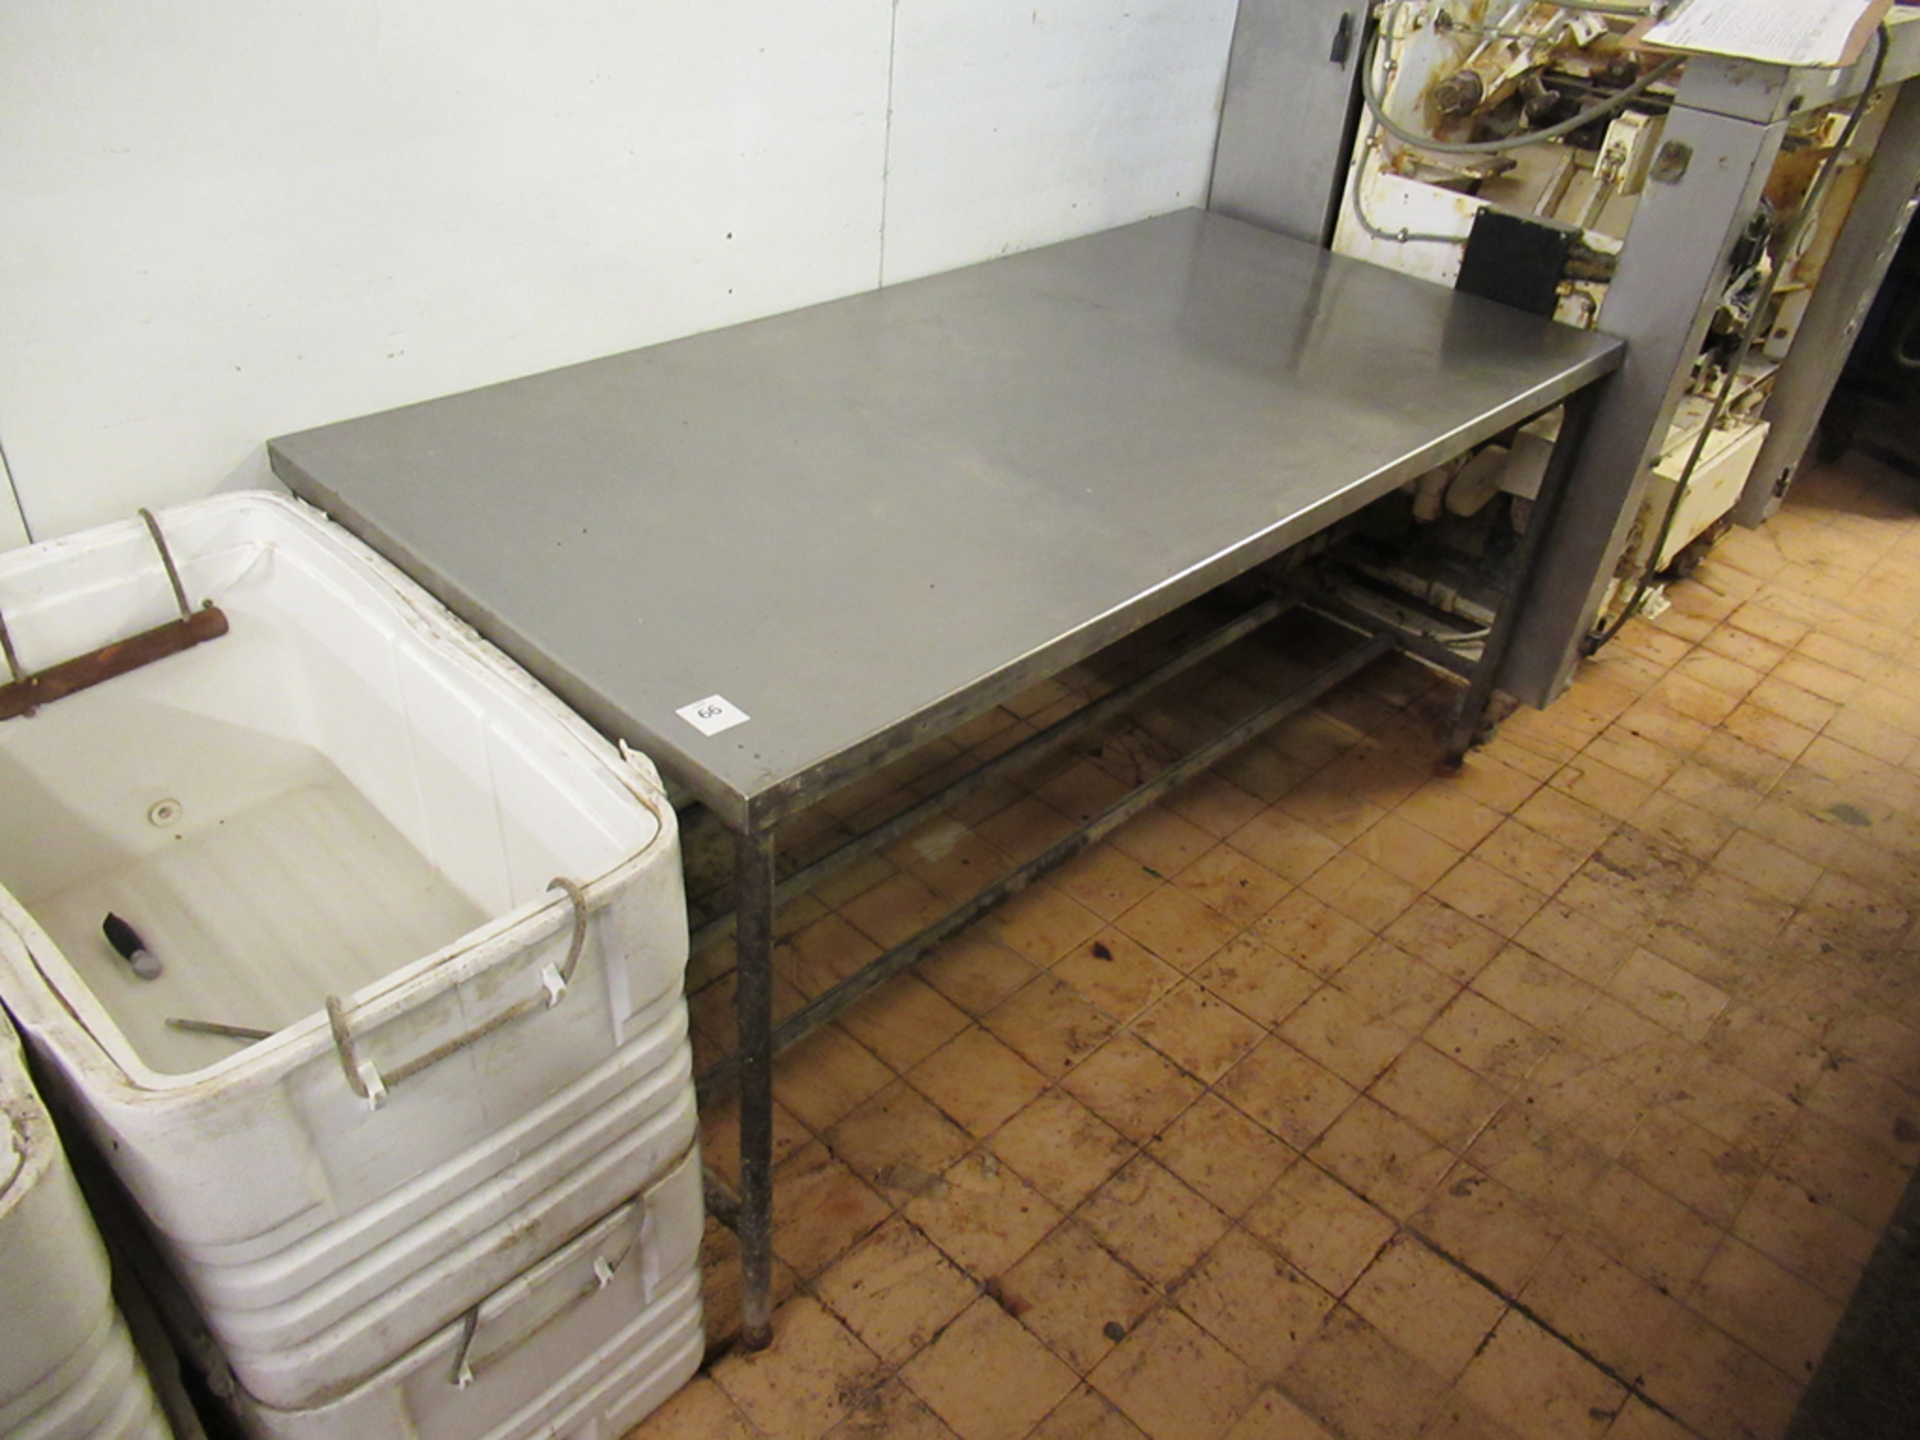 S/S Topped Table 1760 x 840 x 840mm High & 4 x Insulated Fish Boxes (No lids)